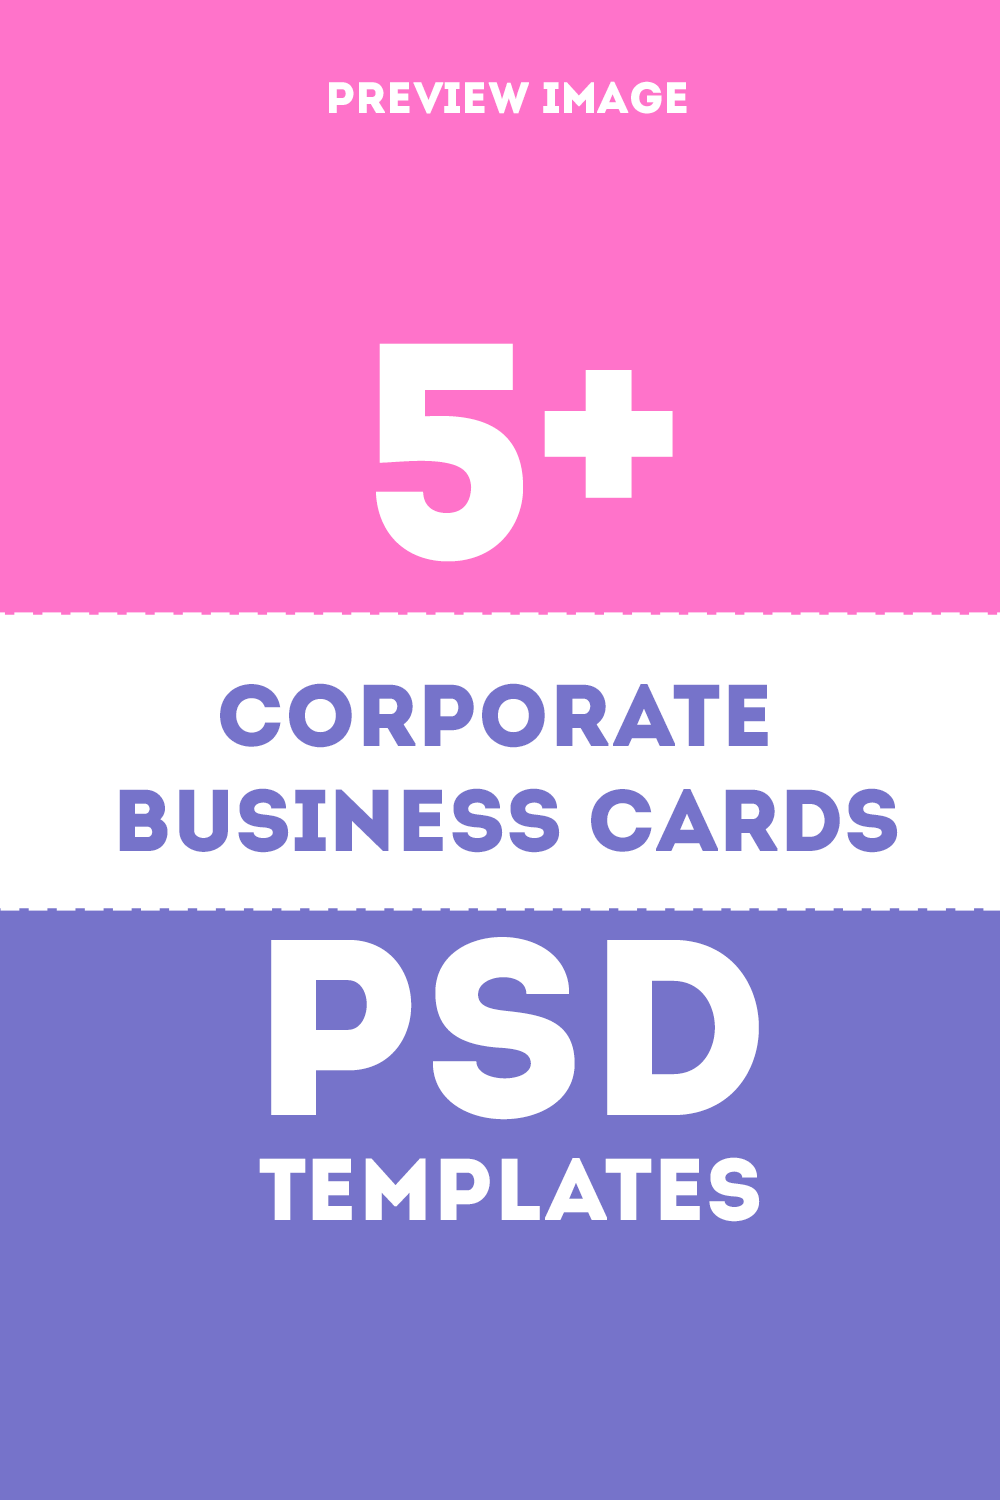 5+ Corporate Style Business Cards Template - Pinterest image preview.